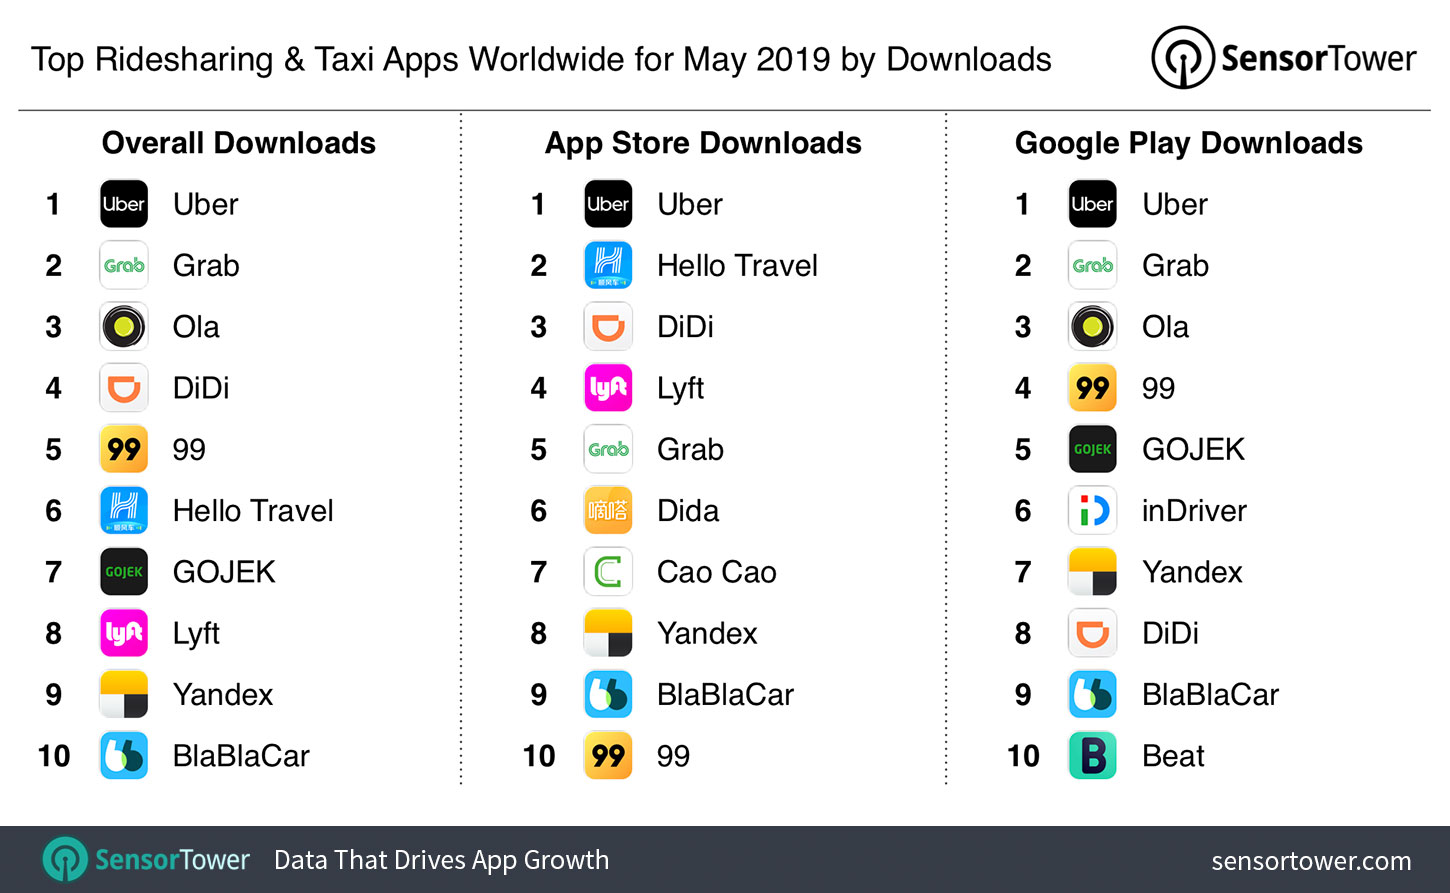 Top Ridesharing & Taxi Apps Worldwide for May 2019 by Downloads